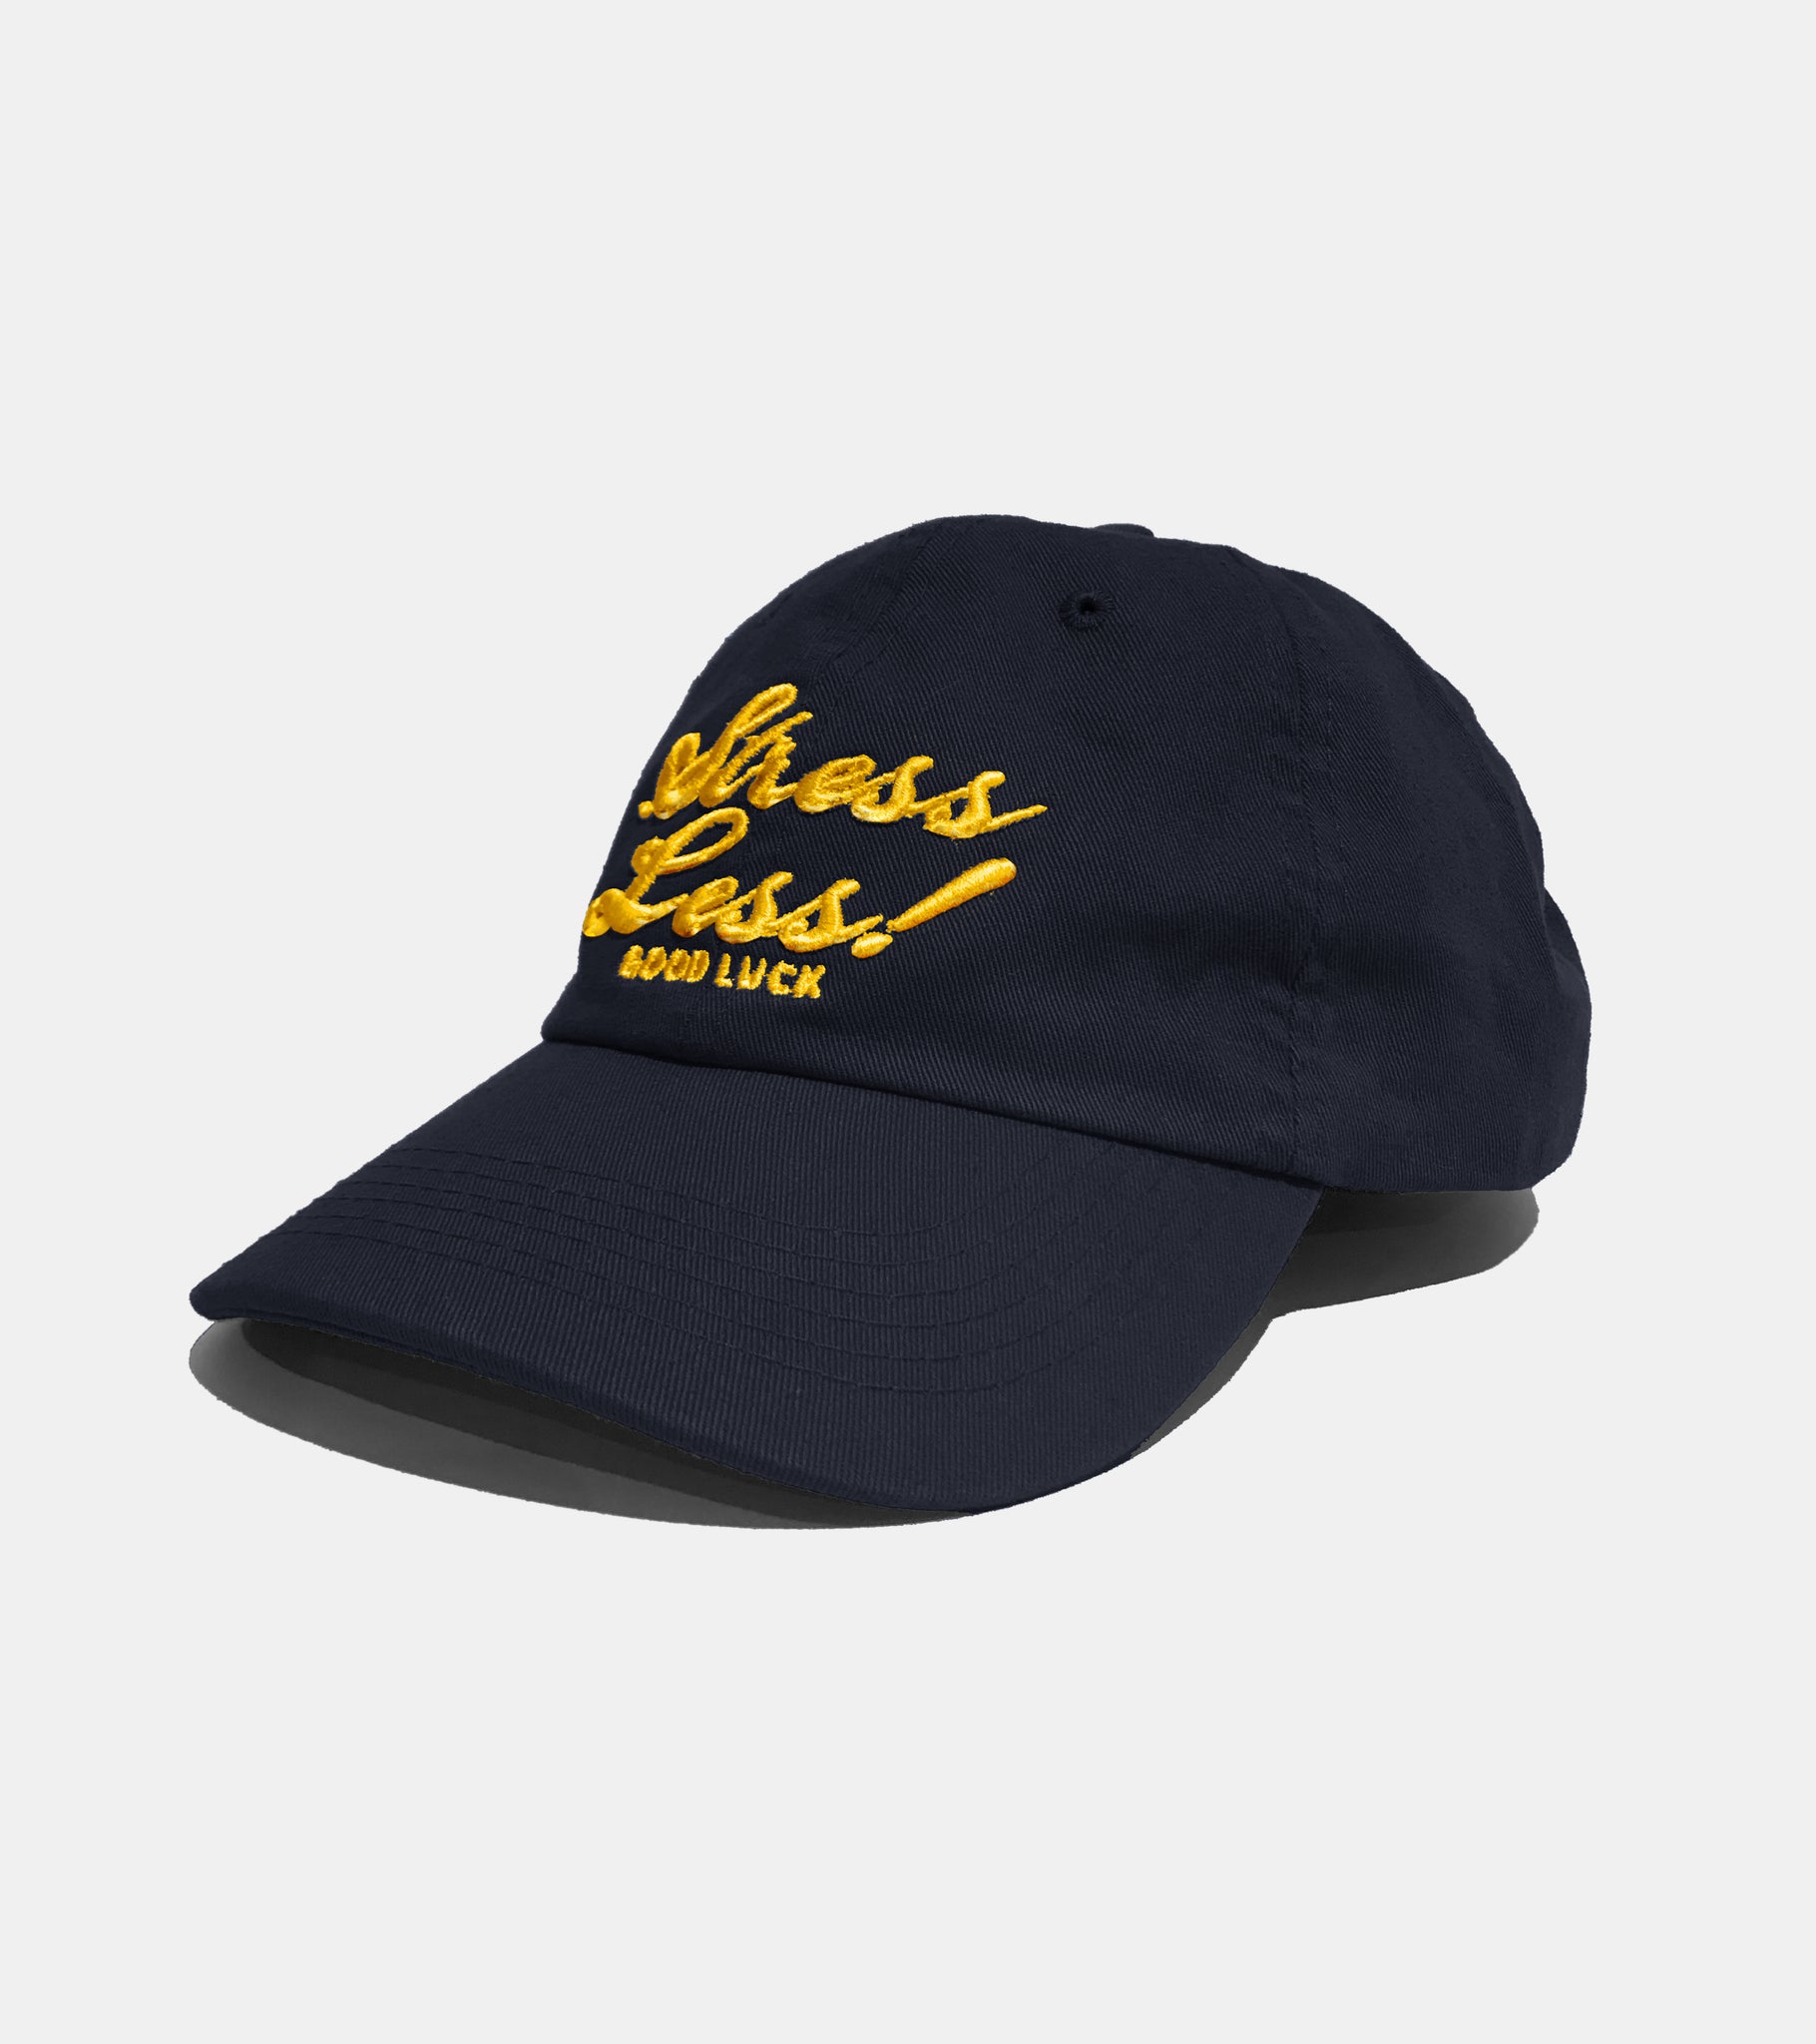 NAVY AND GOLD STRESS LESS CAP BY SORRYIMBUSY